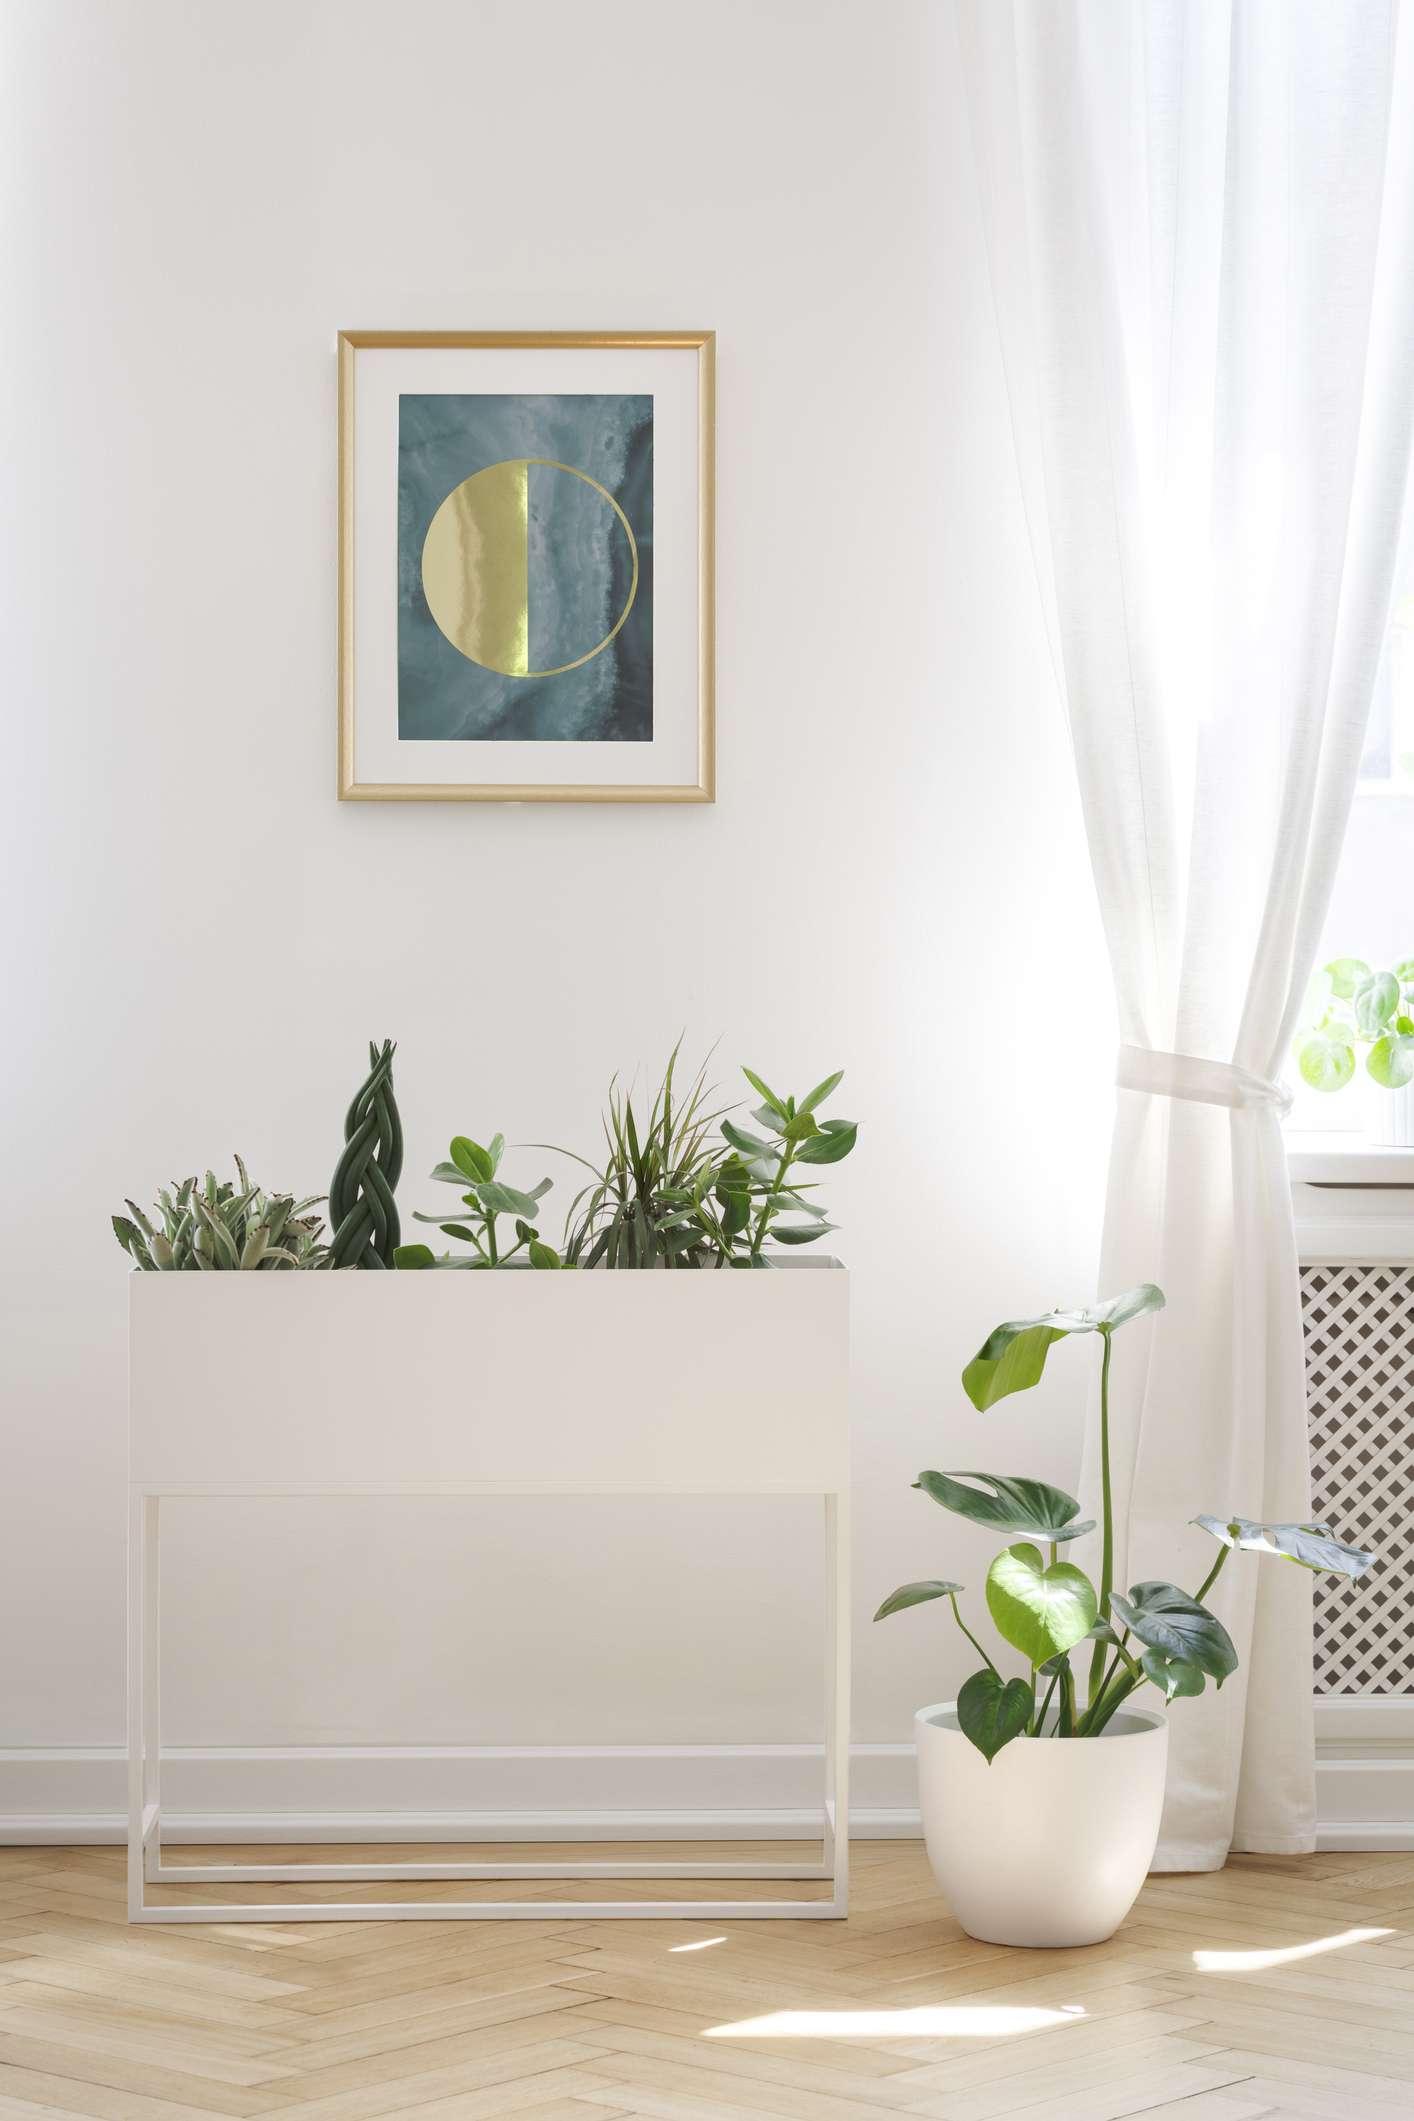 Poster on white wall above plants in living room interior with drapes at window.